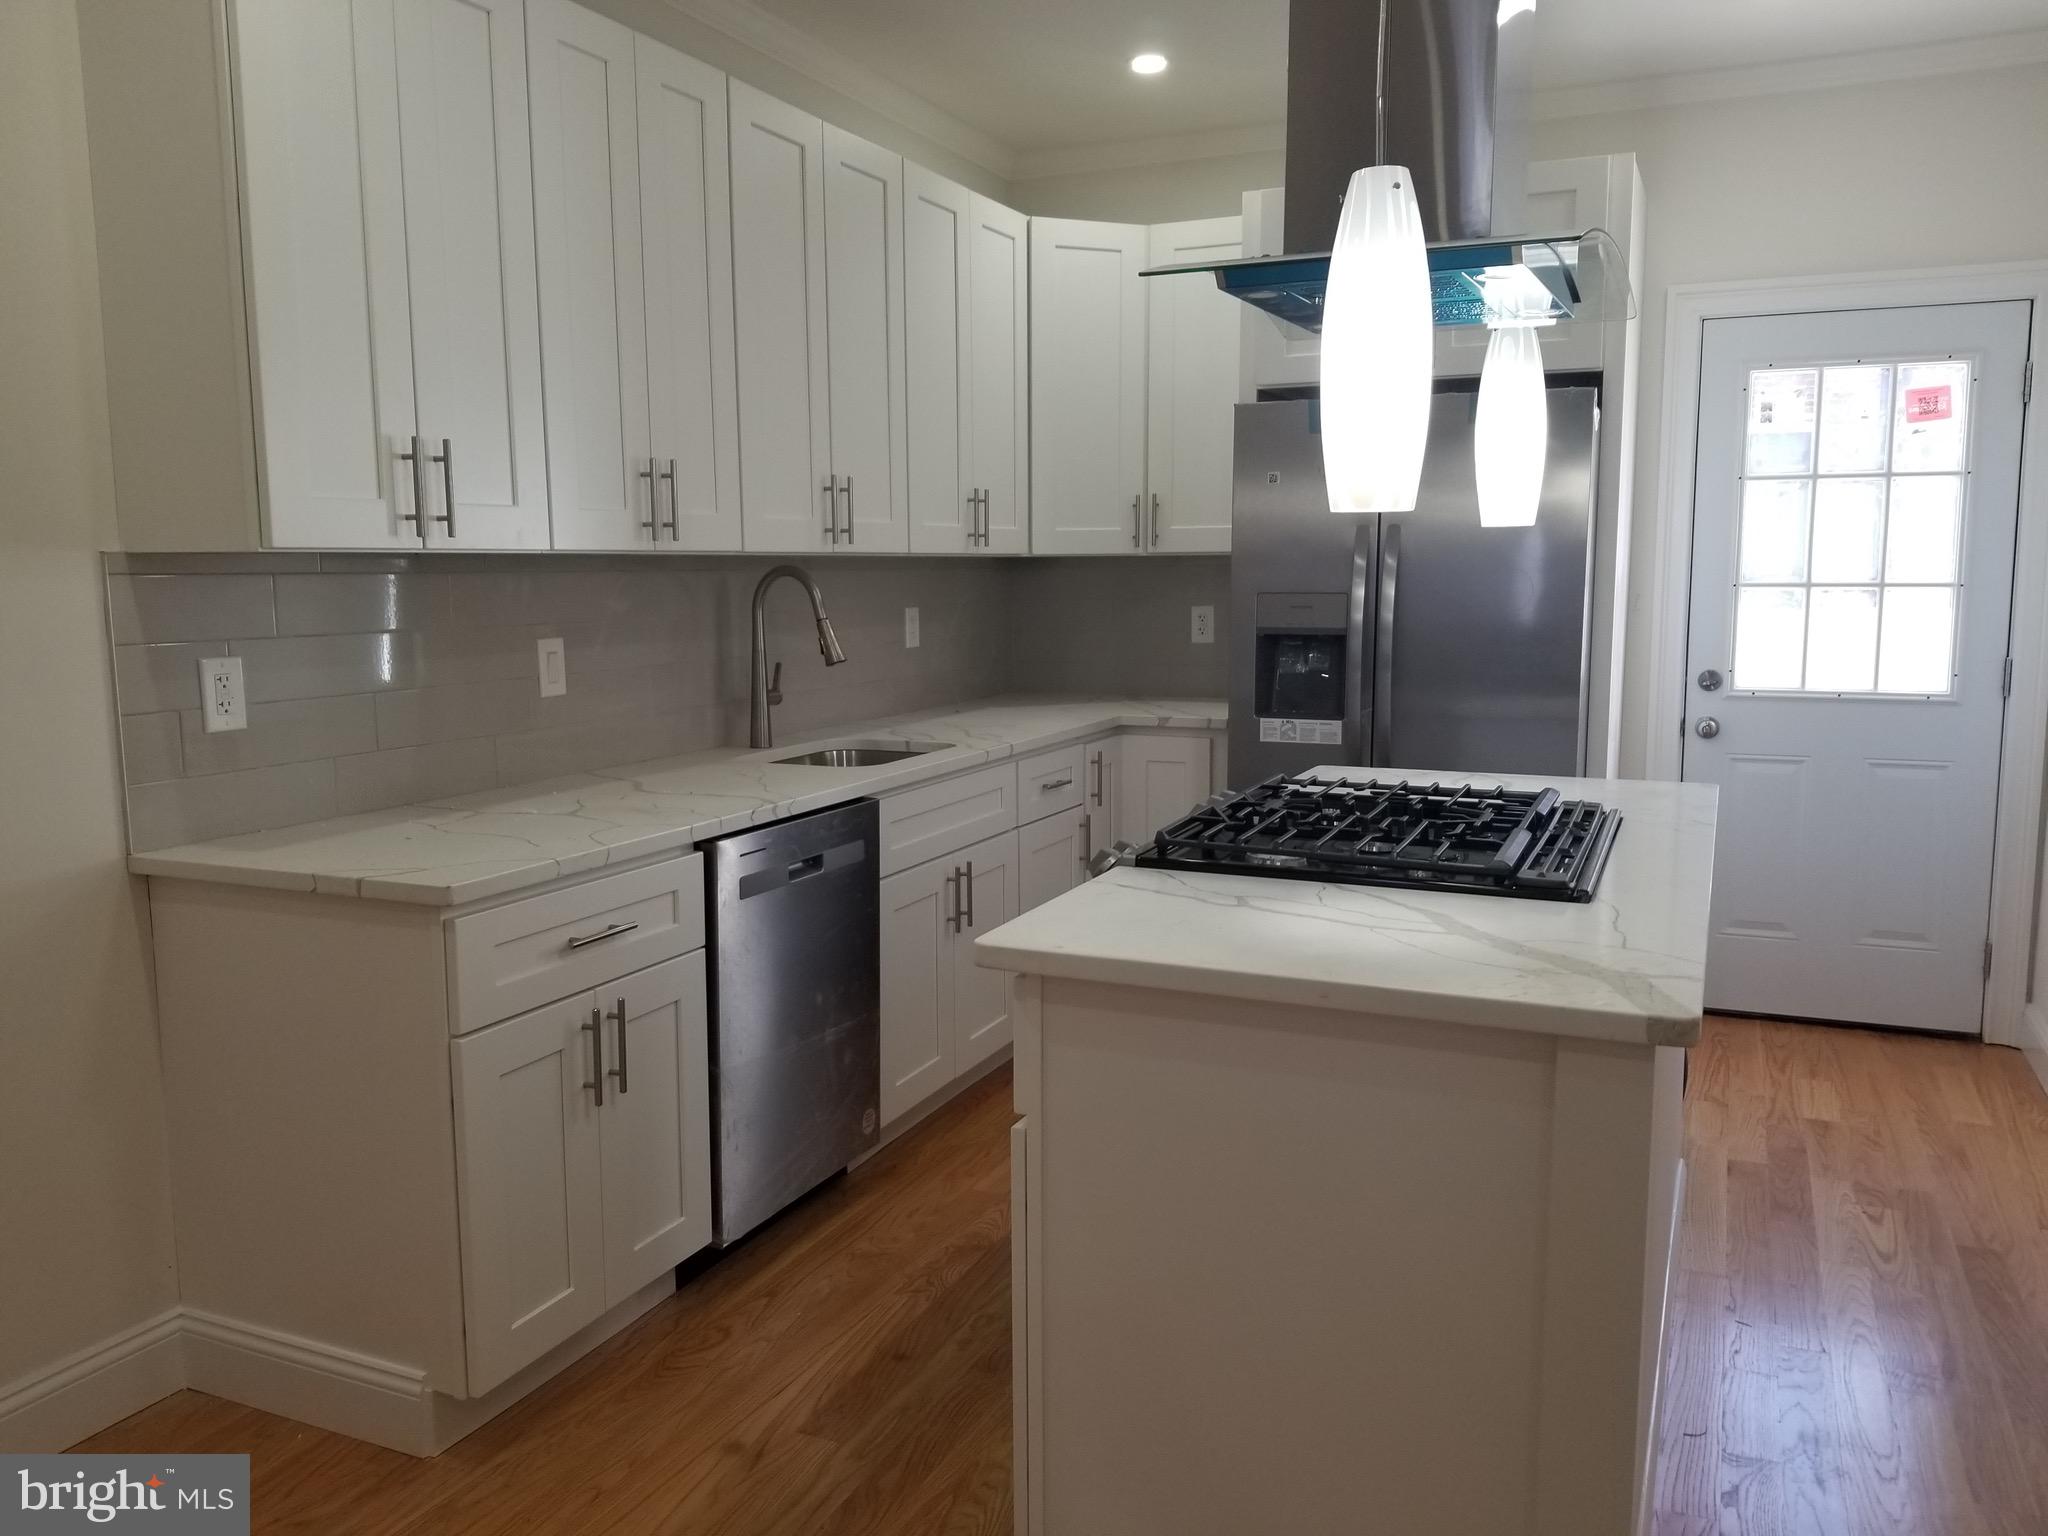 a kitchen with a white cabinets and wooden floor